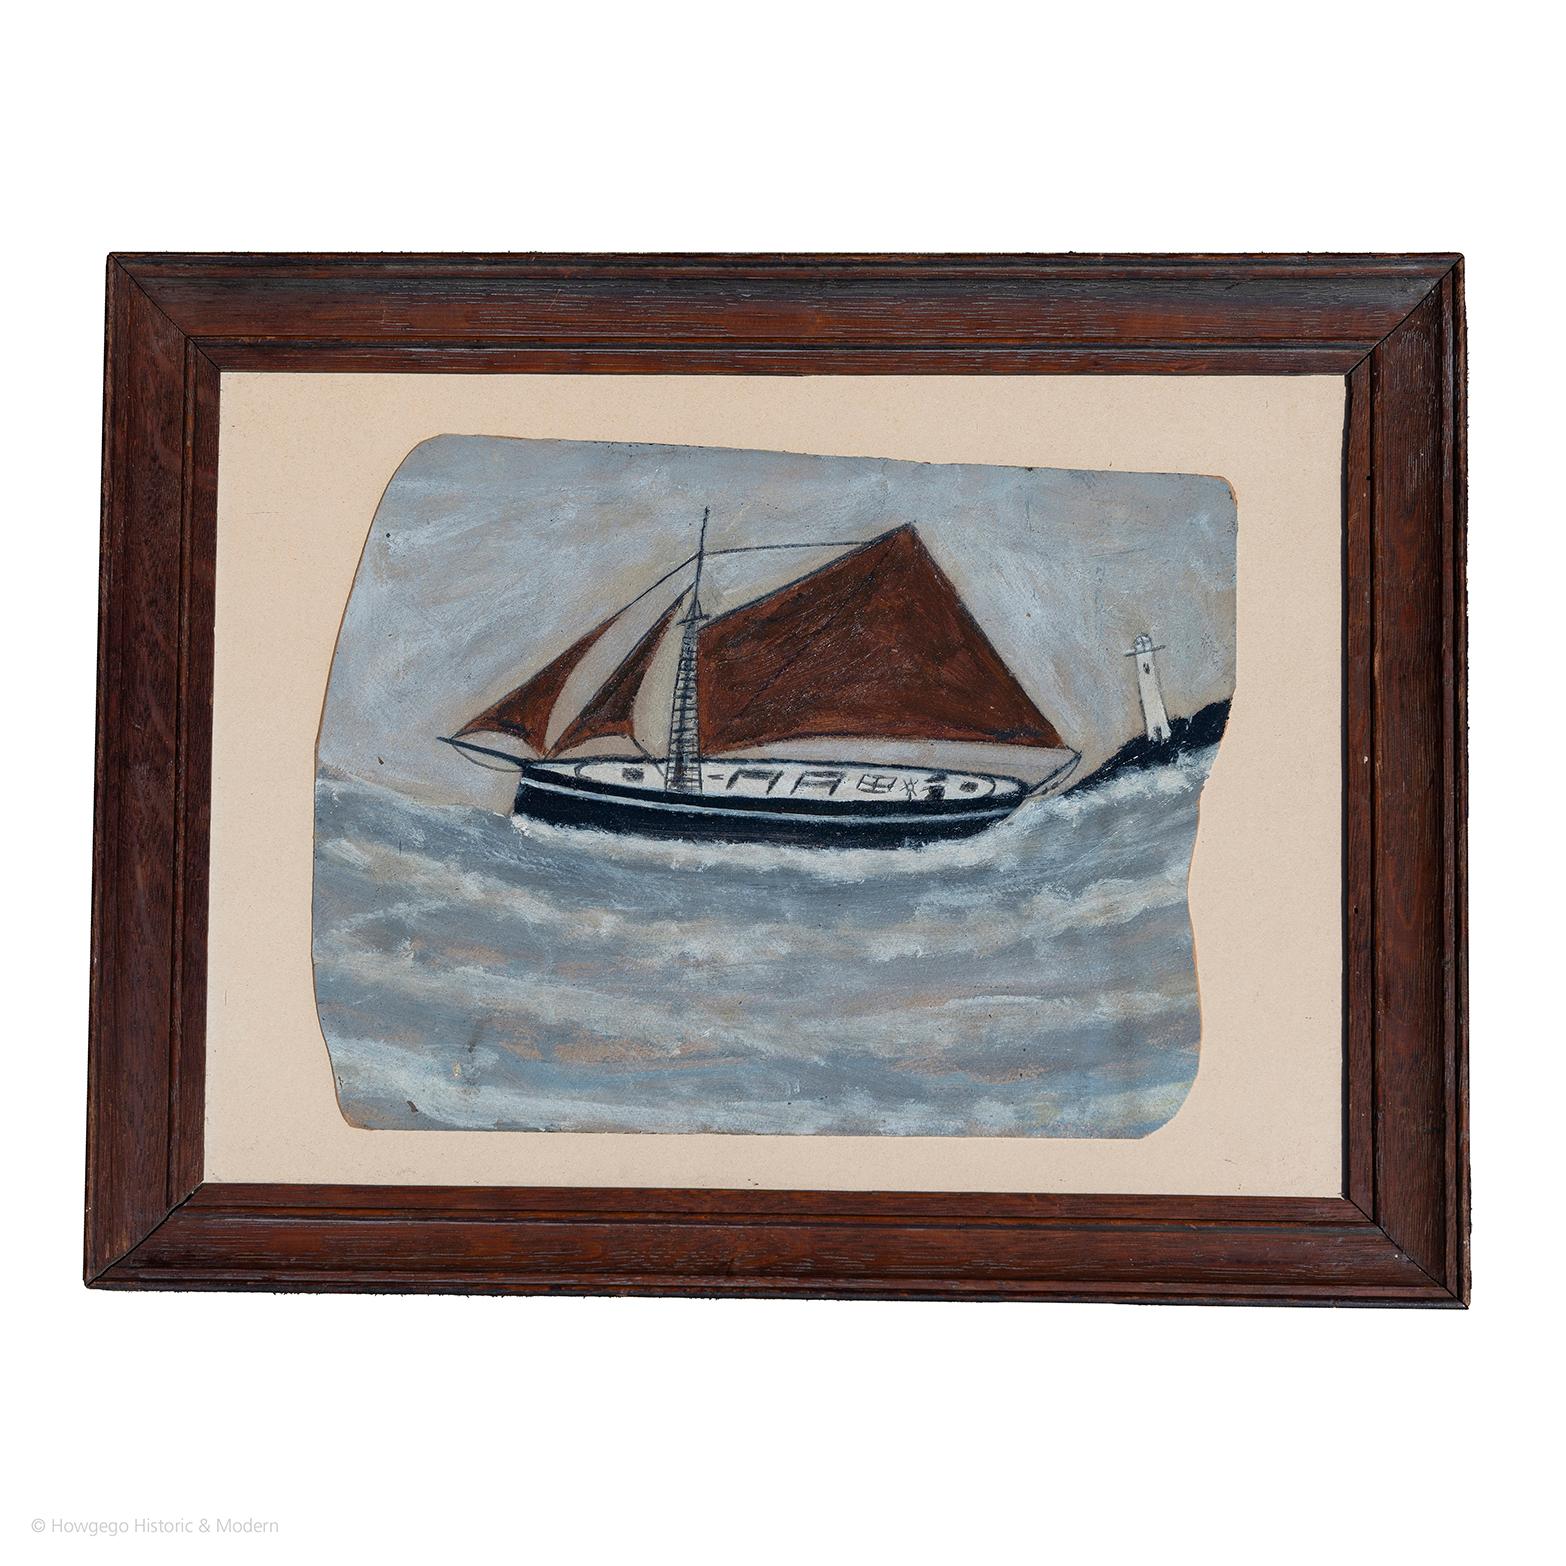 Cutter in full sail with one man visible on board riding a wave past a lighthouse
Oil on cardboard
Characterful naive picture in the spirit of Alfred Wallis

Board length 28cm, 11